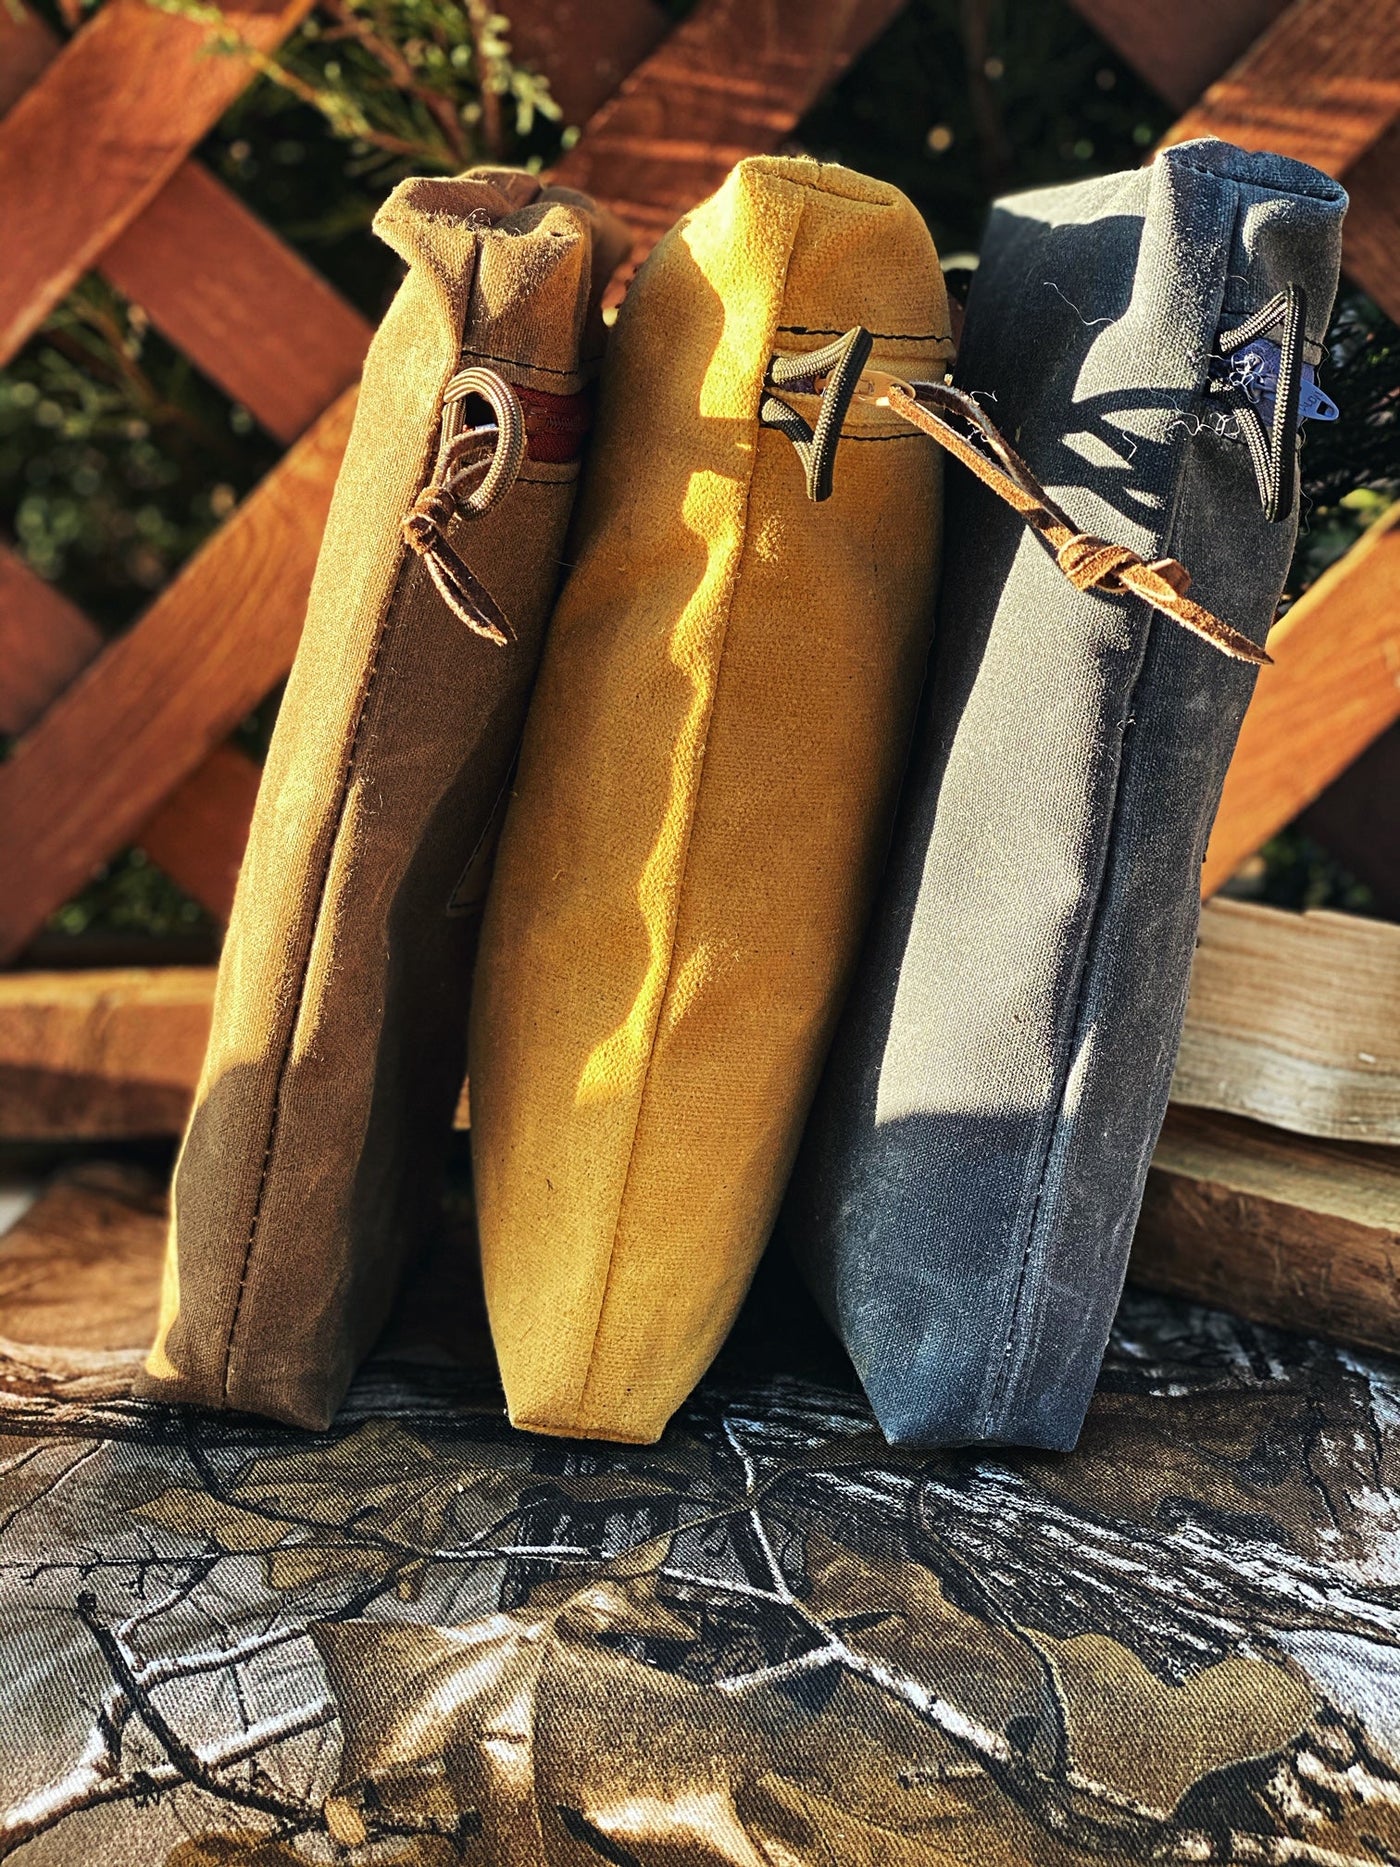 Handmade Waxed Canvas Old World EDC Pouch Bushcraft Survival Camping Possibles Dopp Grooming (Various Colors) - Colorado Bushcraft